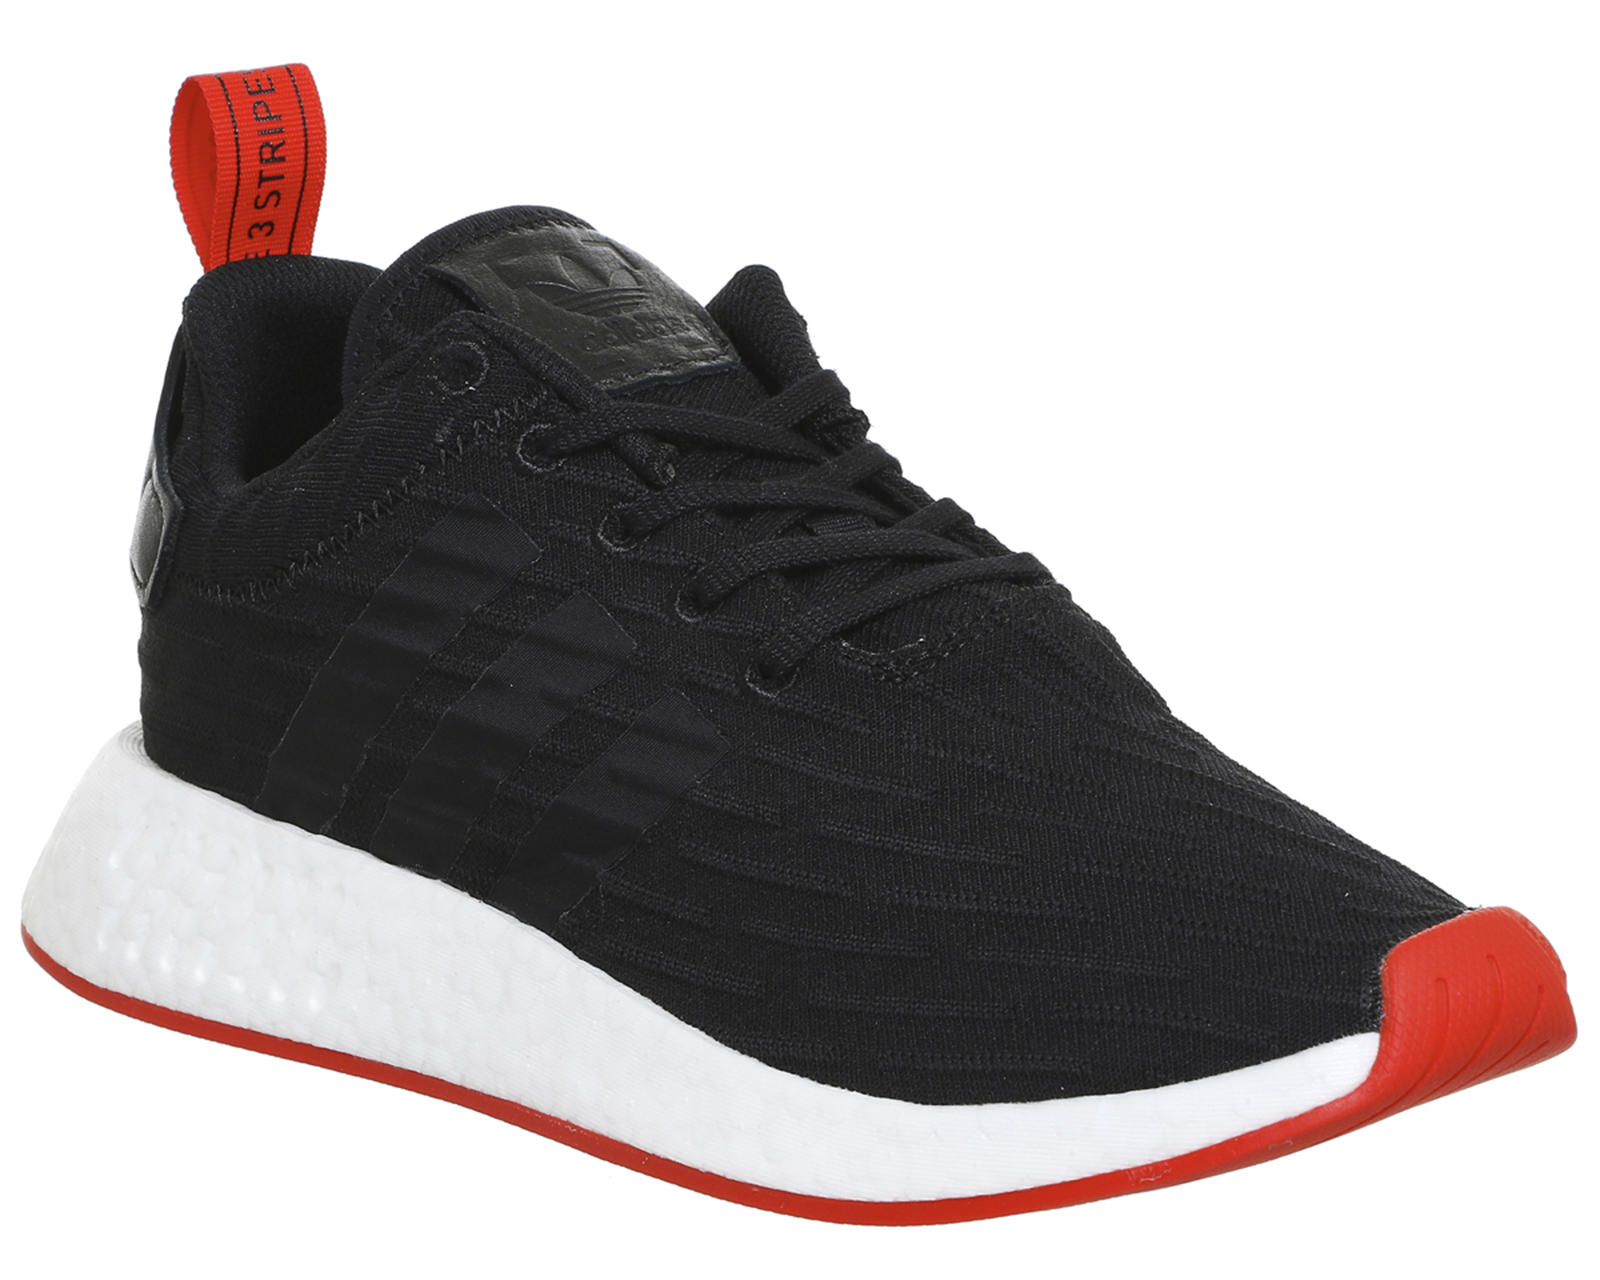 adidas nmd r2 red and black